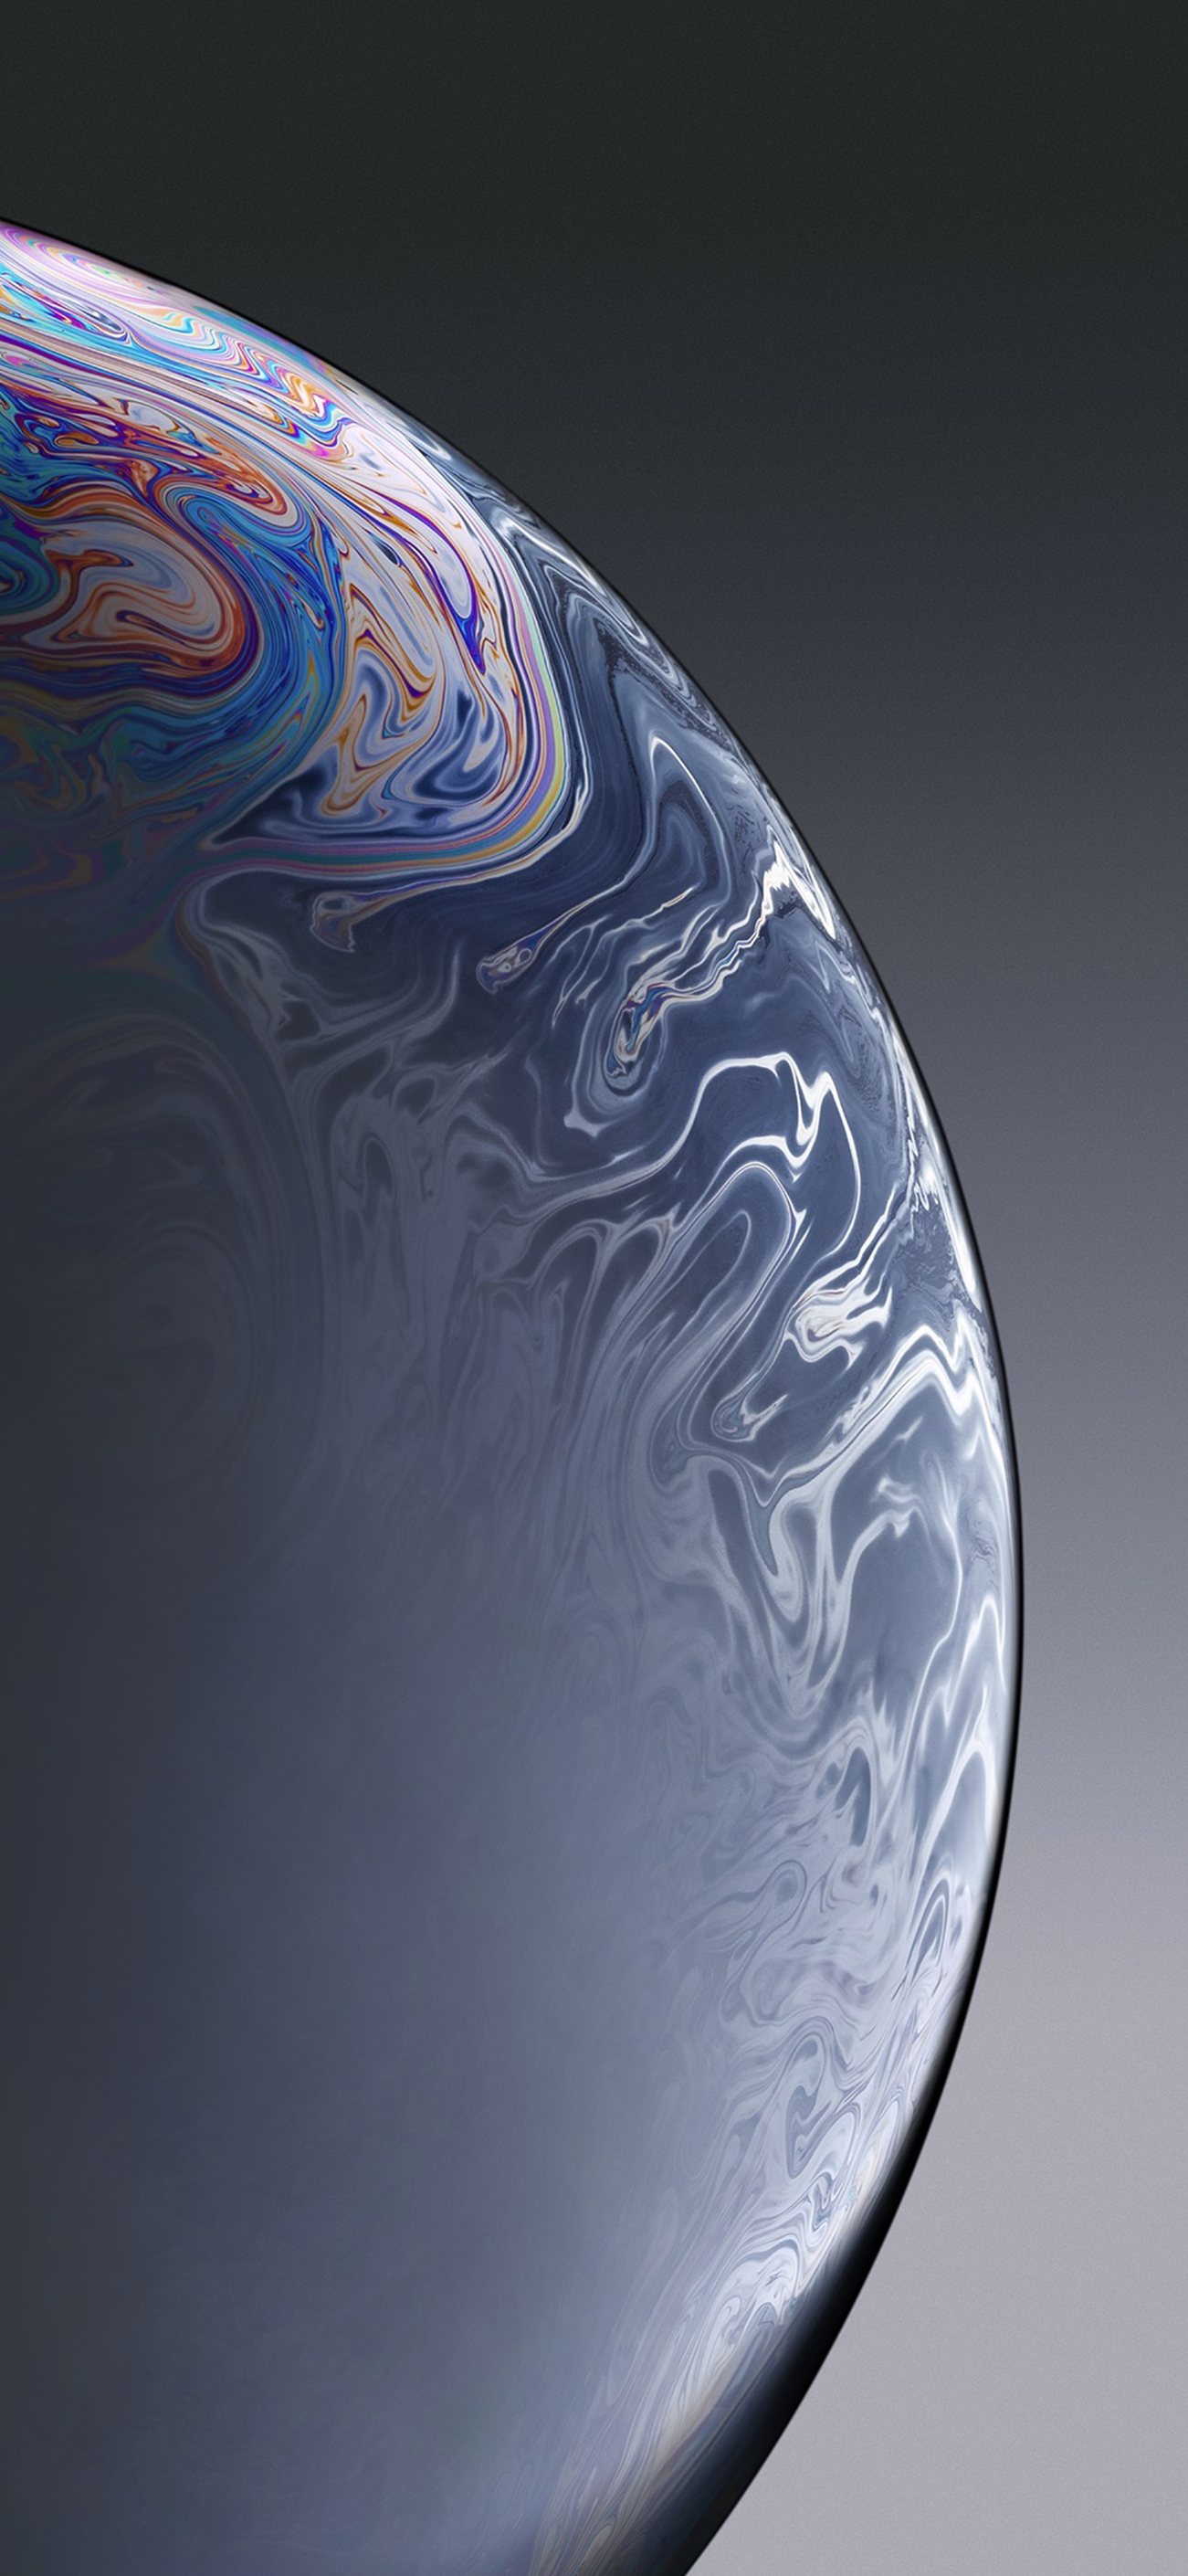 Iphone Xr Wallpaper Single Bubble Space Grey Wallpapers Central